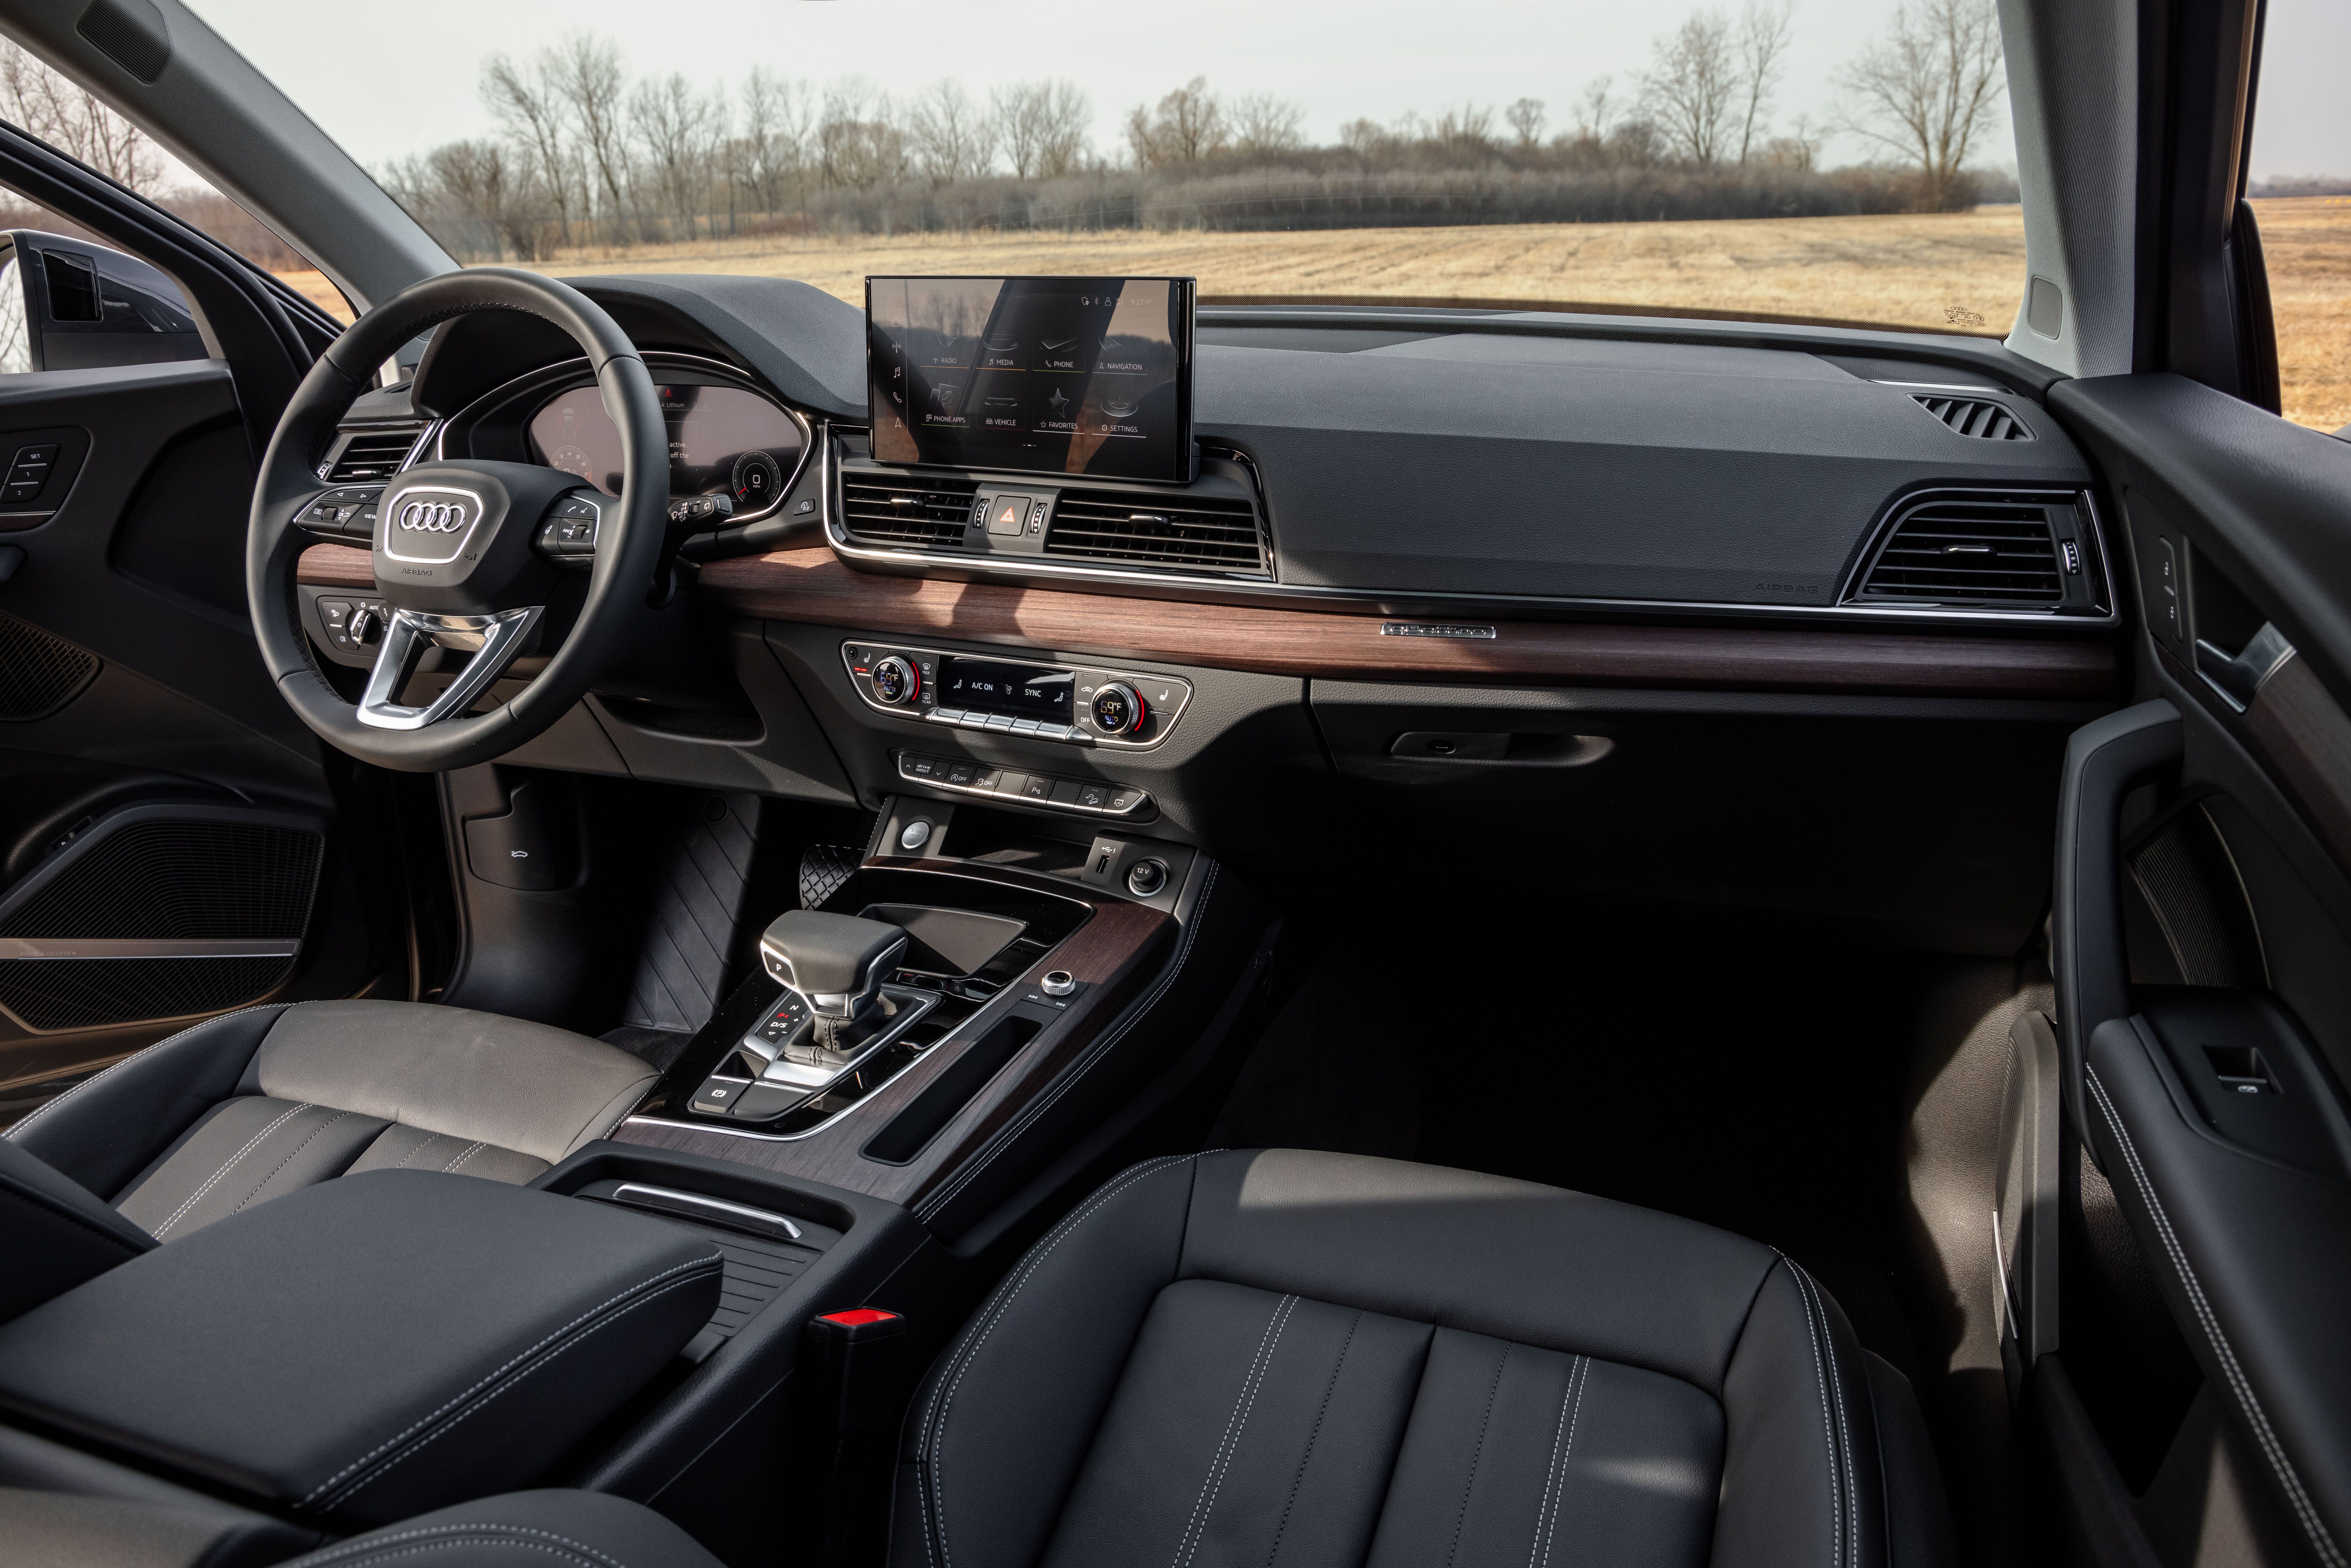 4 Pros and 3 Cons With Driving the 2022 Audi Q5